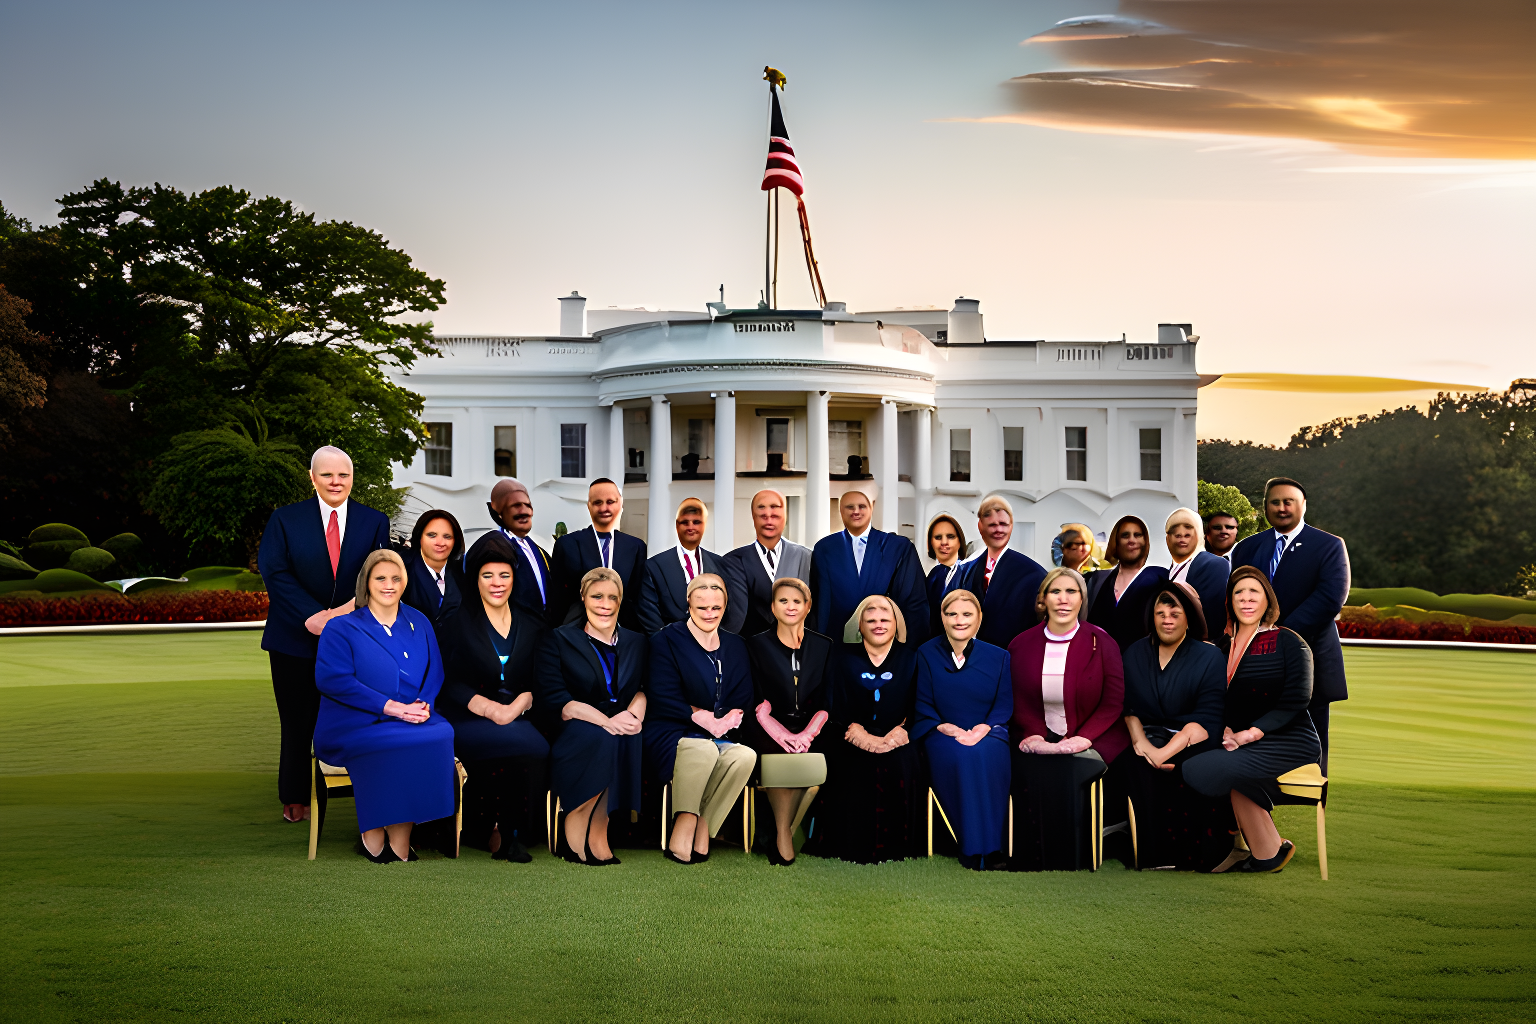 A group photo of whitehouse staff